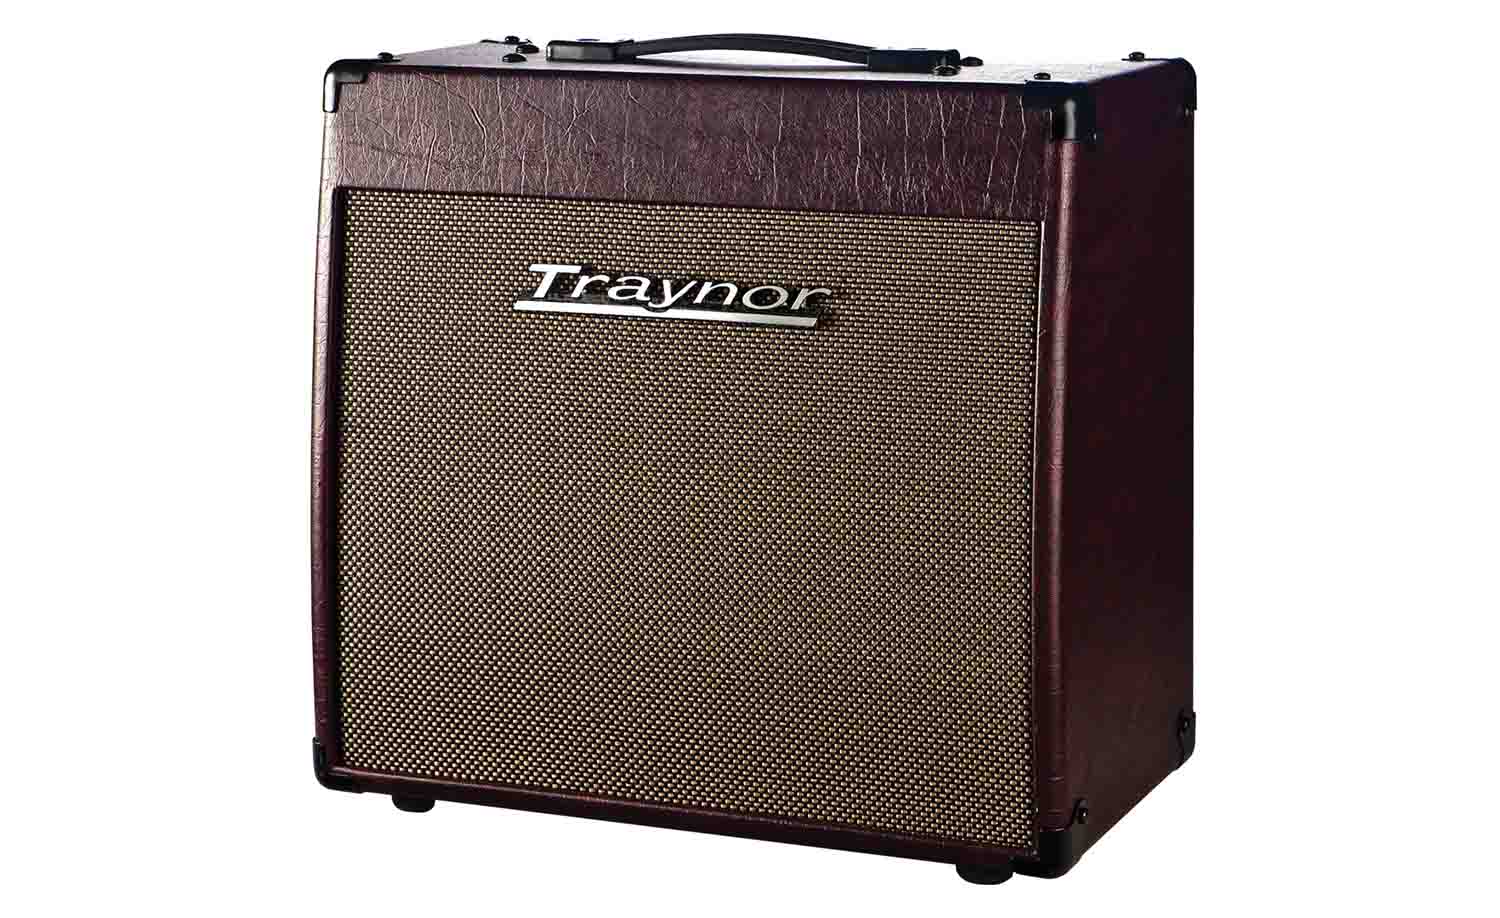 Traynor YCV20WR Guitar Combo Amplifier - Wine Red - Hollywood DJ